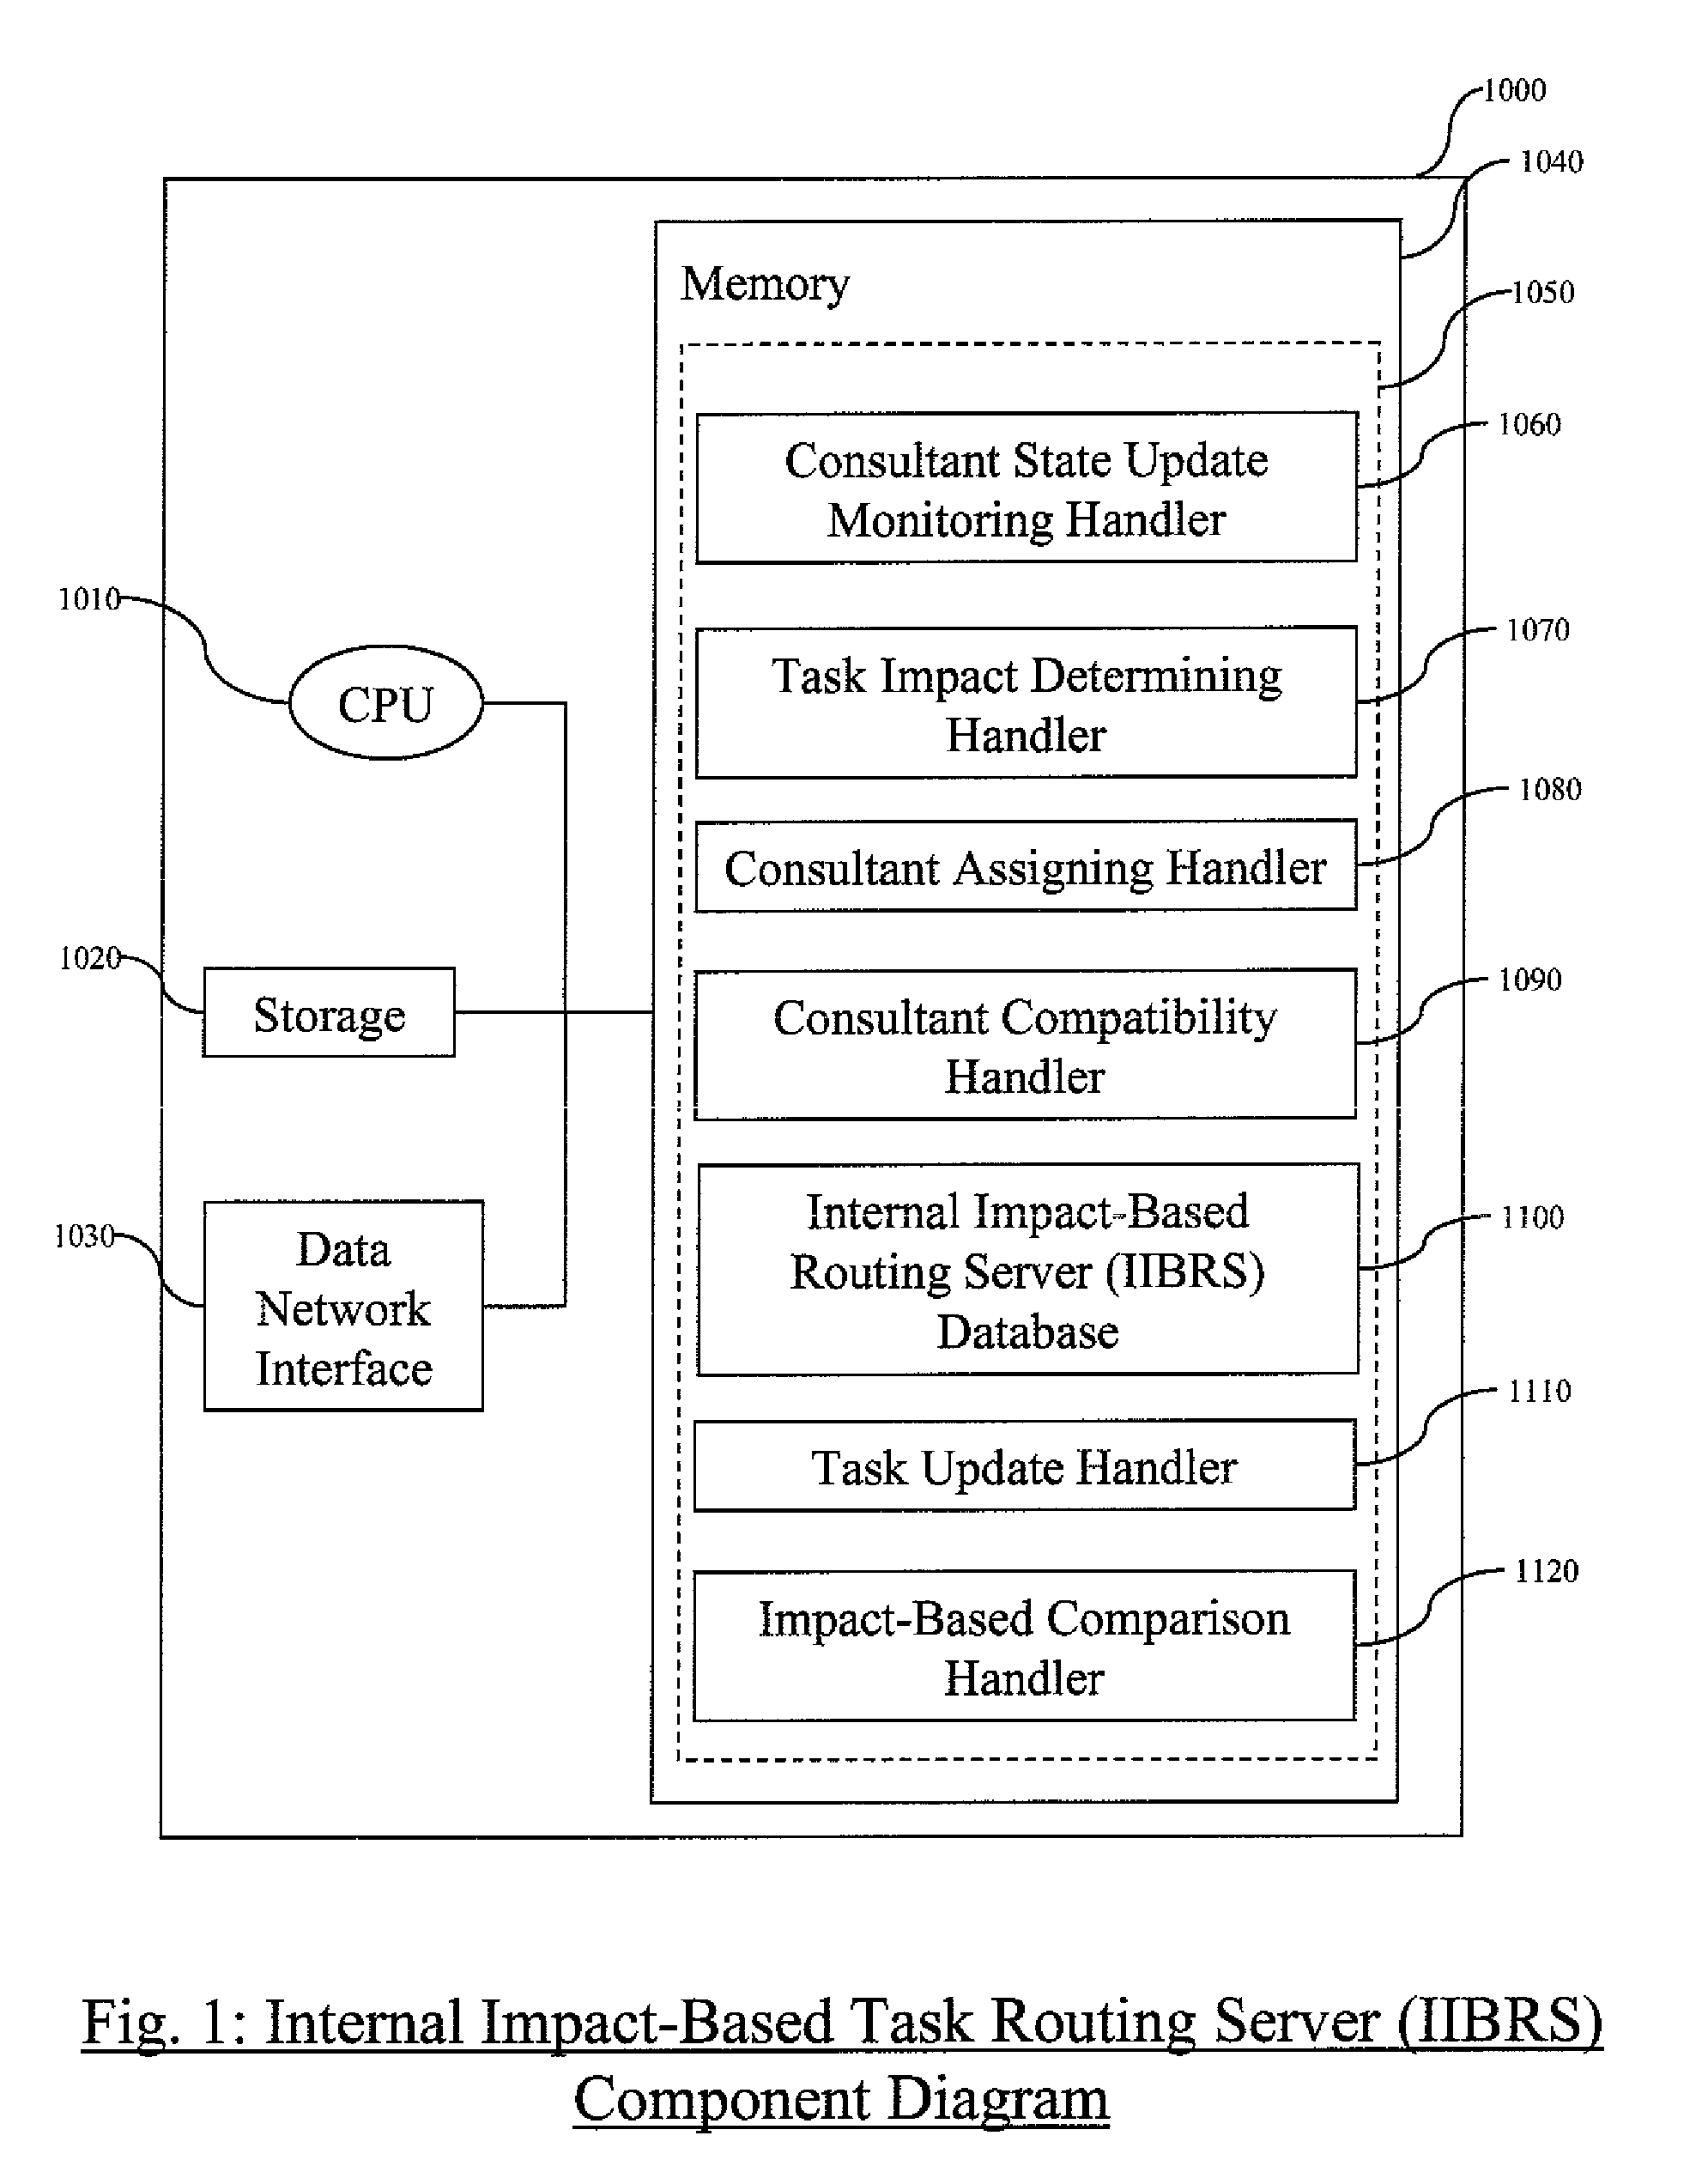 Method and system for routing a task to an employee based on physical and emotional state